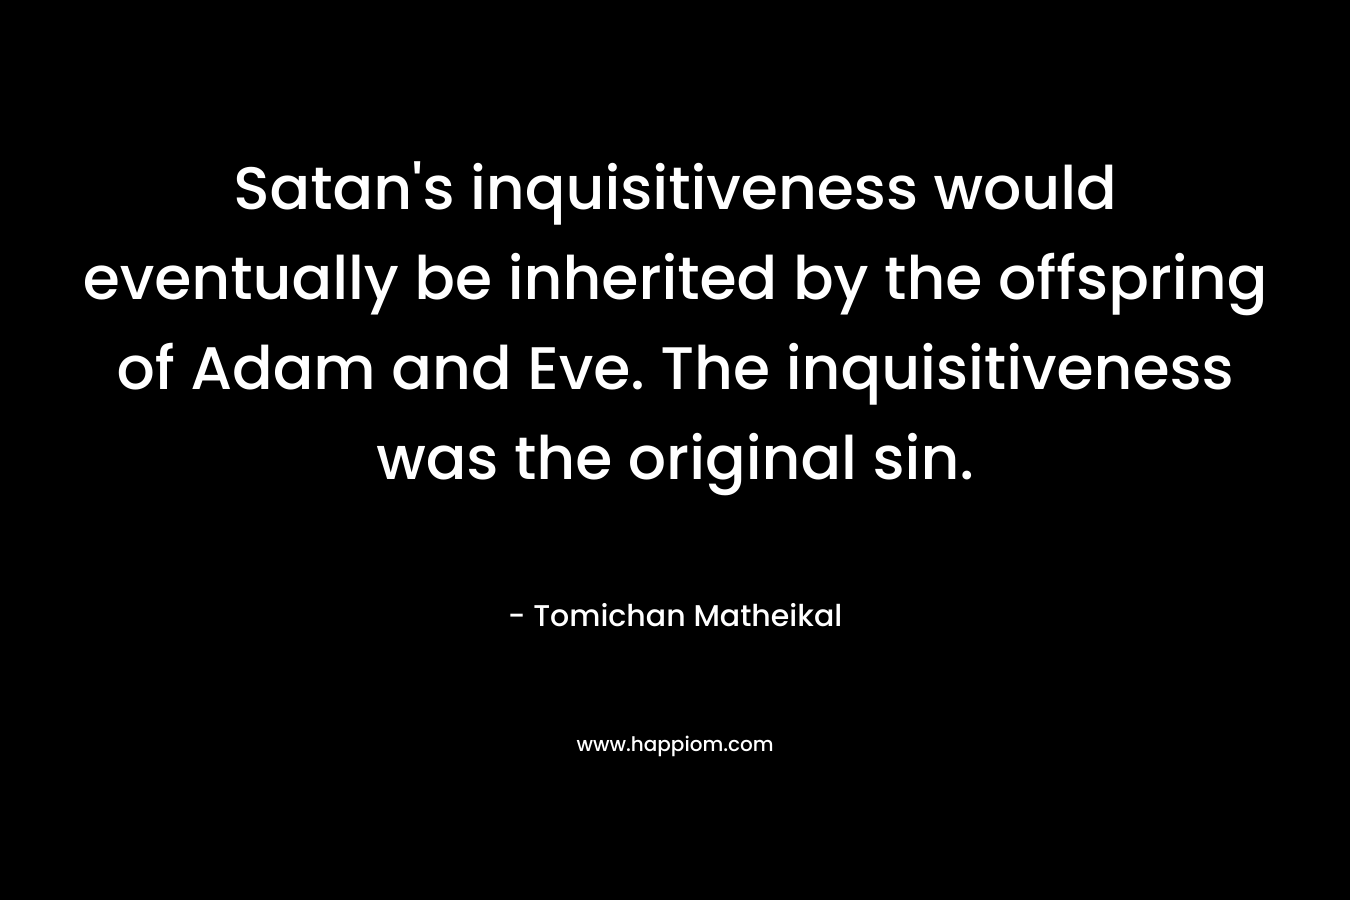 Satan’s inquisitiveness would eventually be inherited by the offspring of Adam and Eve. The inquisitiveness was the original sin. – Tomichan Matheikal